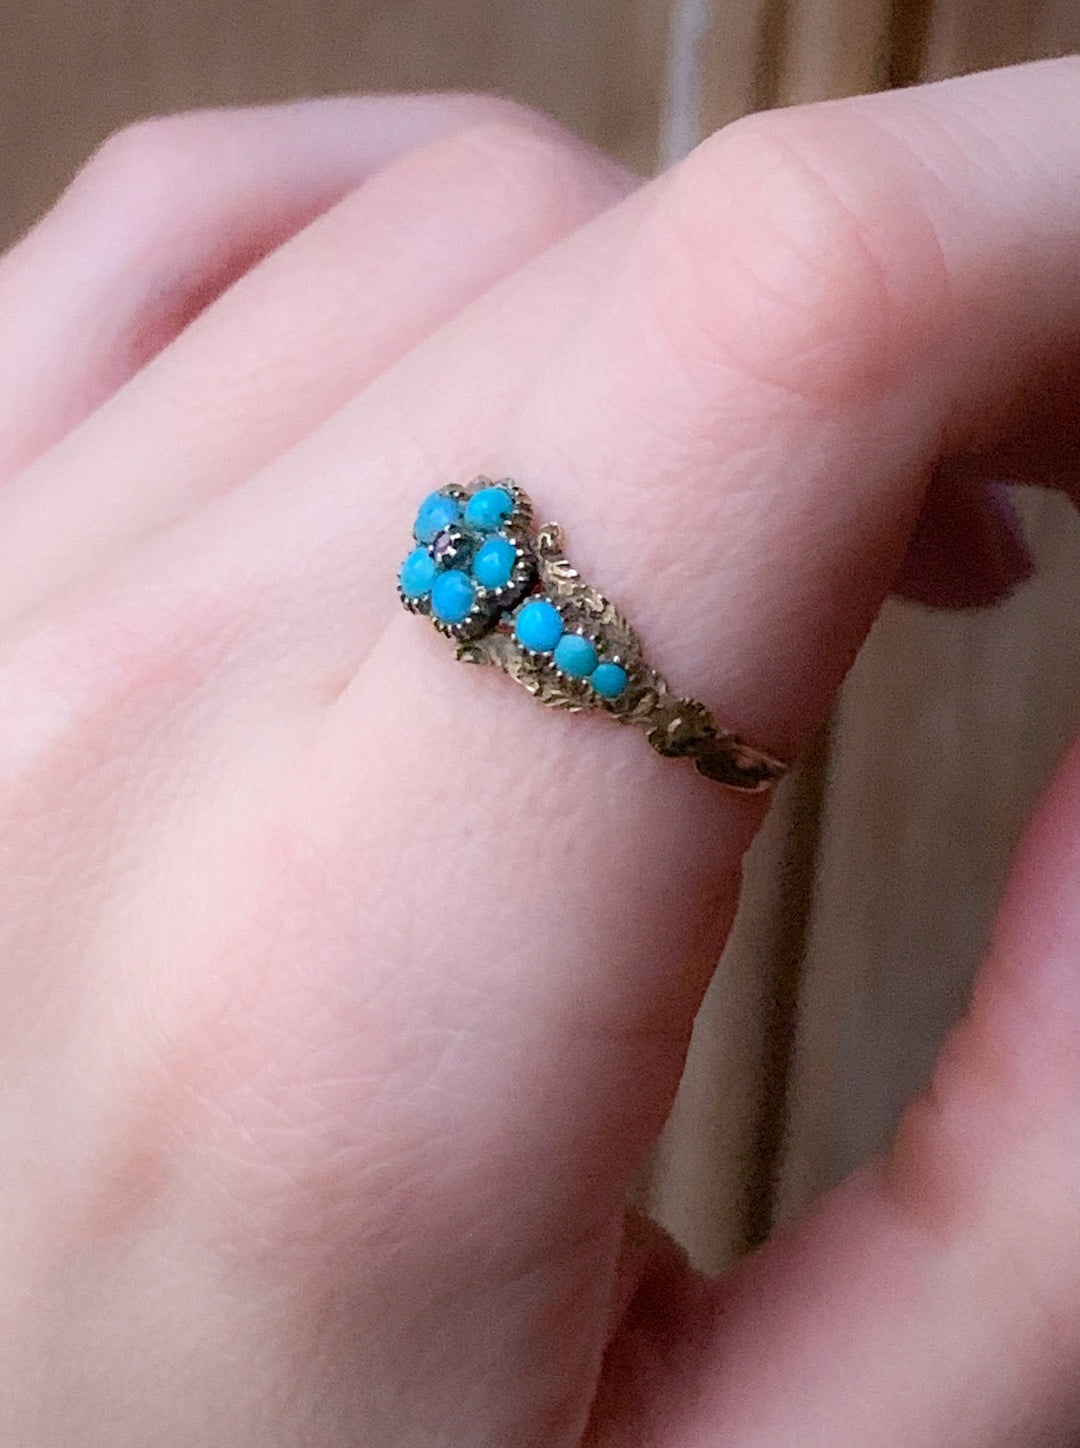 15k Outstanding Victorian Flower Ring of Turquoise and Garnet